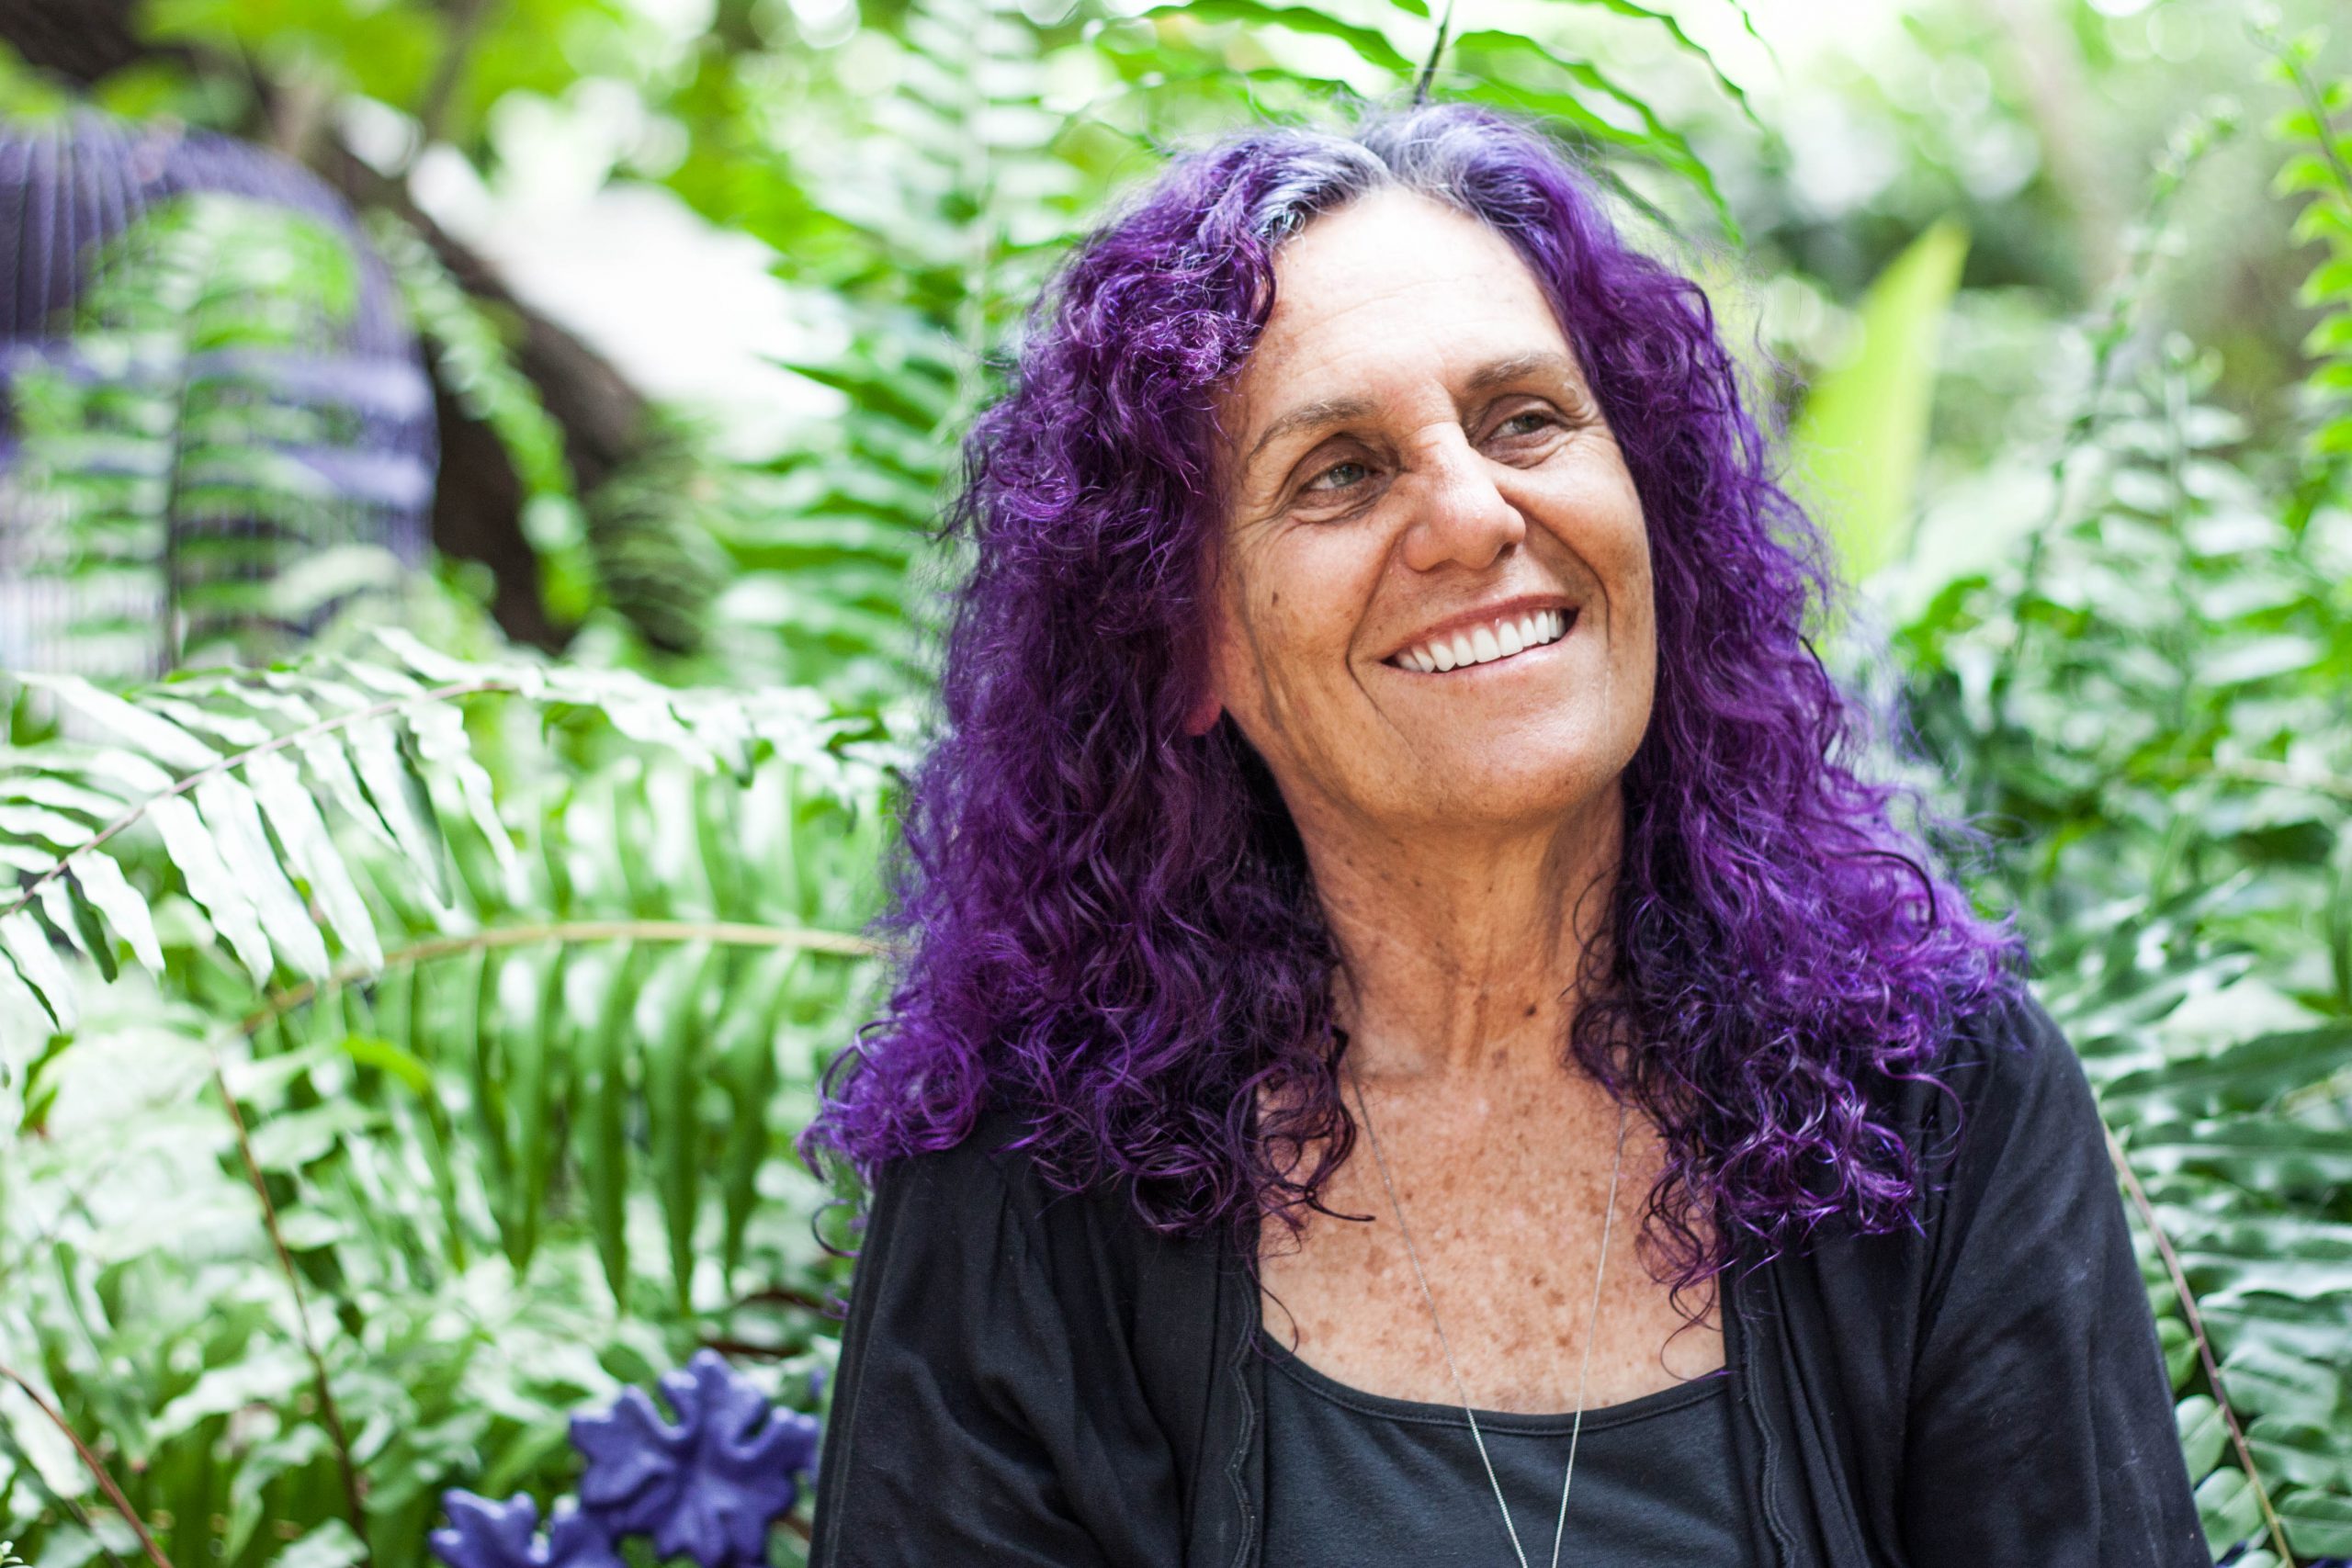 The purple-haired grandma who lives in a tree has to move or tear it down.